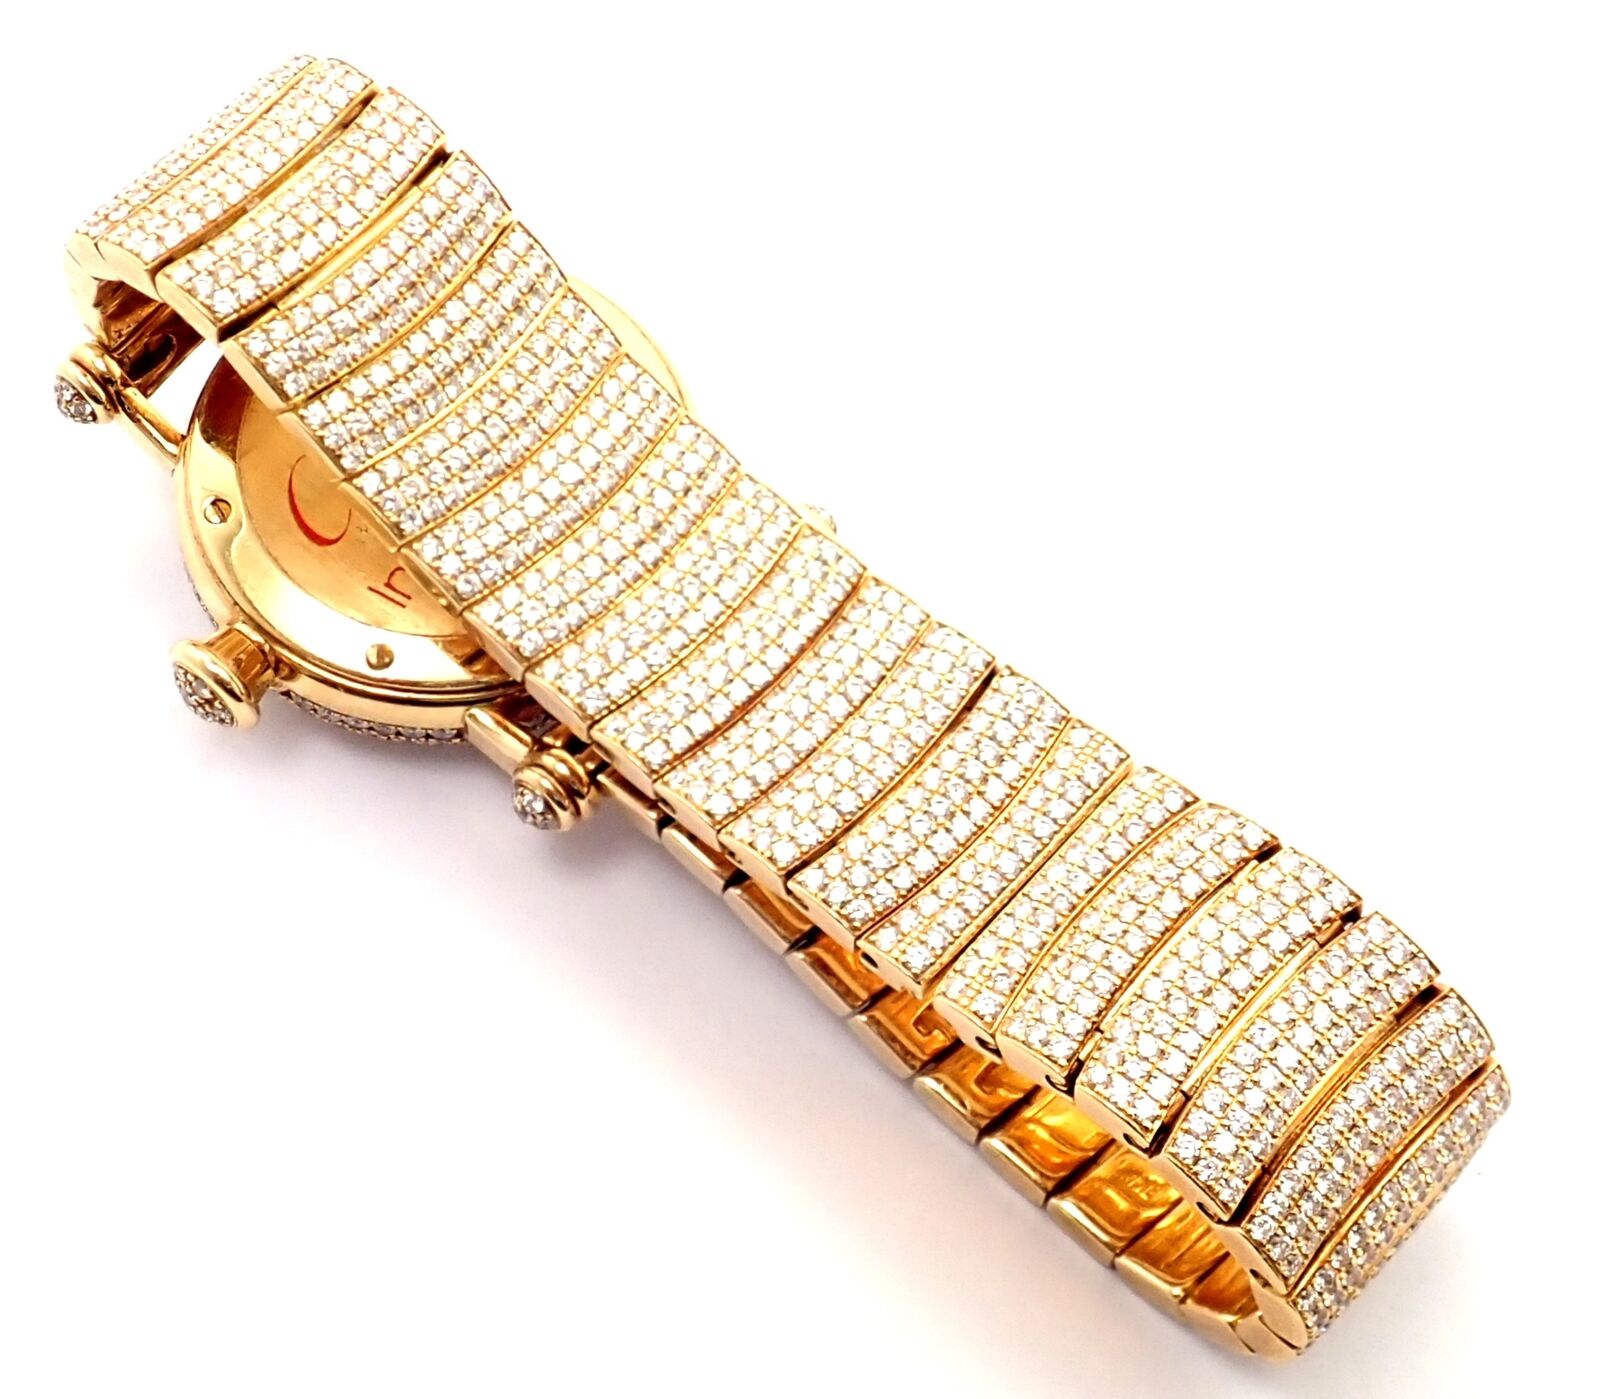 Cartier Jewelry & Watches:Watches, Parts & Accessories:Watches:Wristwatches Authentic! Cartier Diabolo Pave 15ct Diamond 18k Yellow Gold Quartz Watch 1450